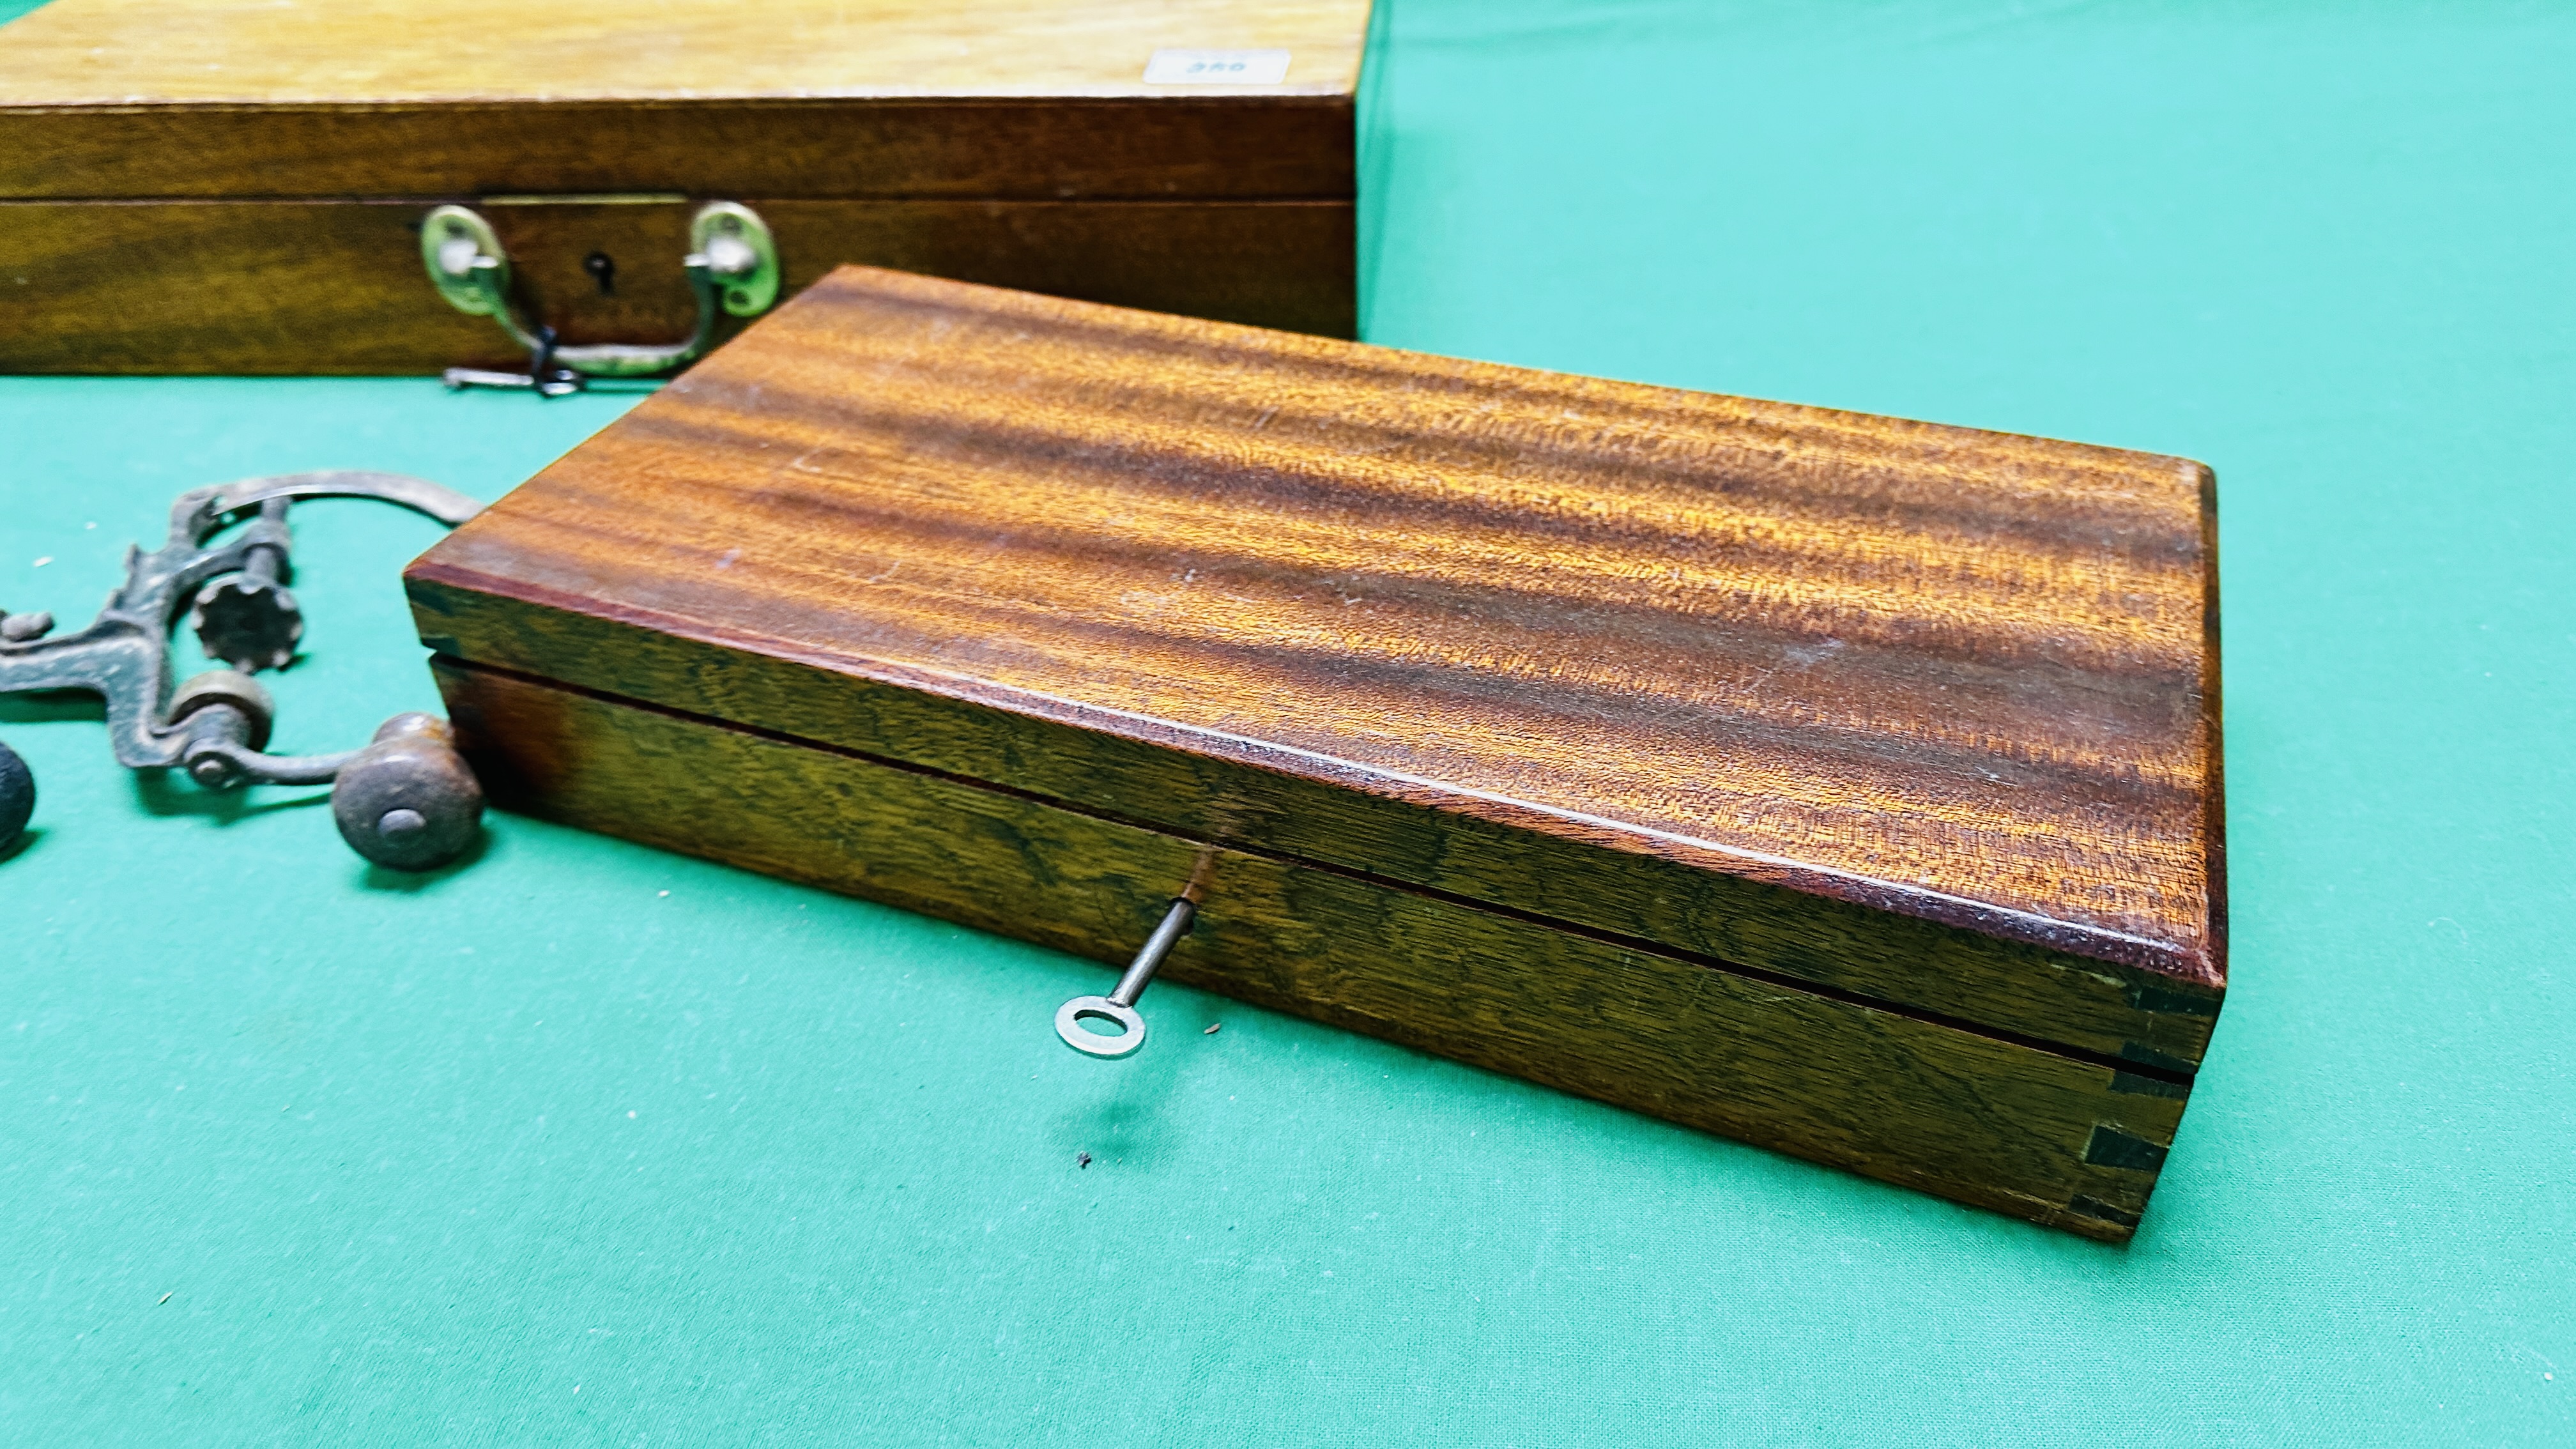 TWO VINTAGE WOODEN BOXES FOR PISTOLS AND TWO VINTAGE LOADING TOOLS - Image 7 of 10